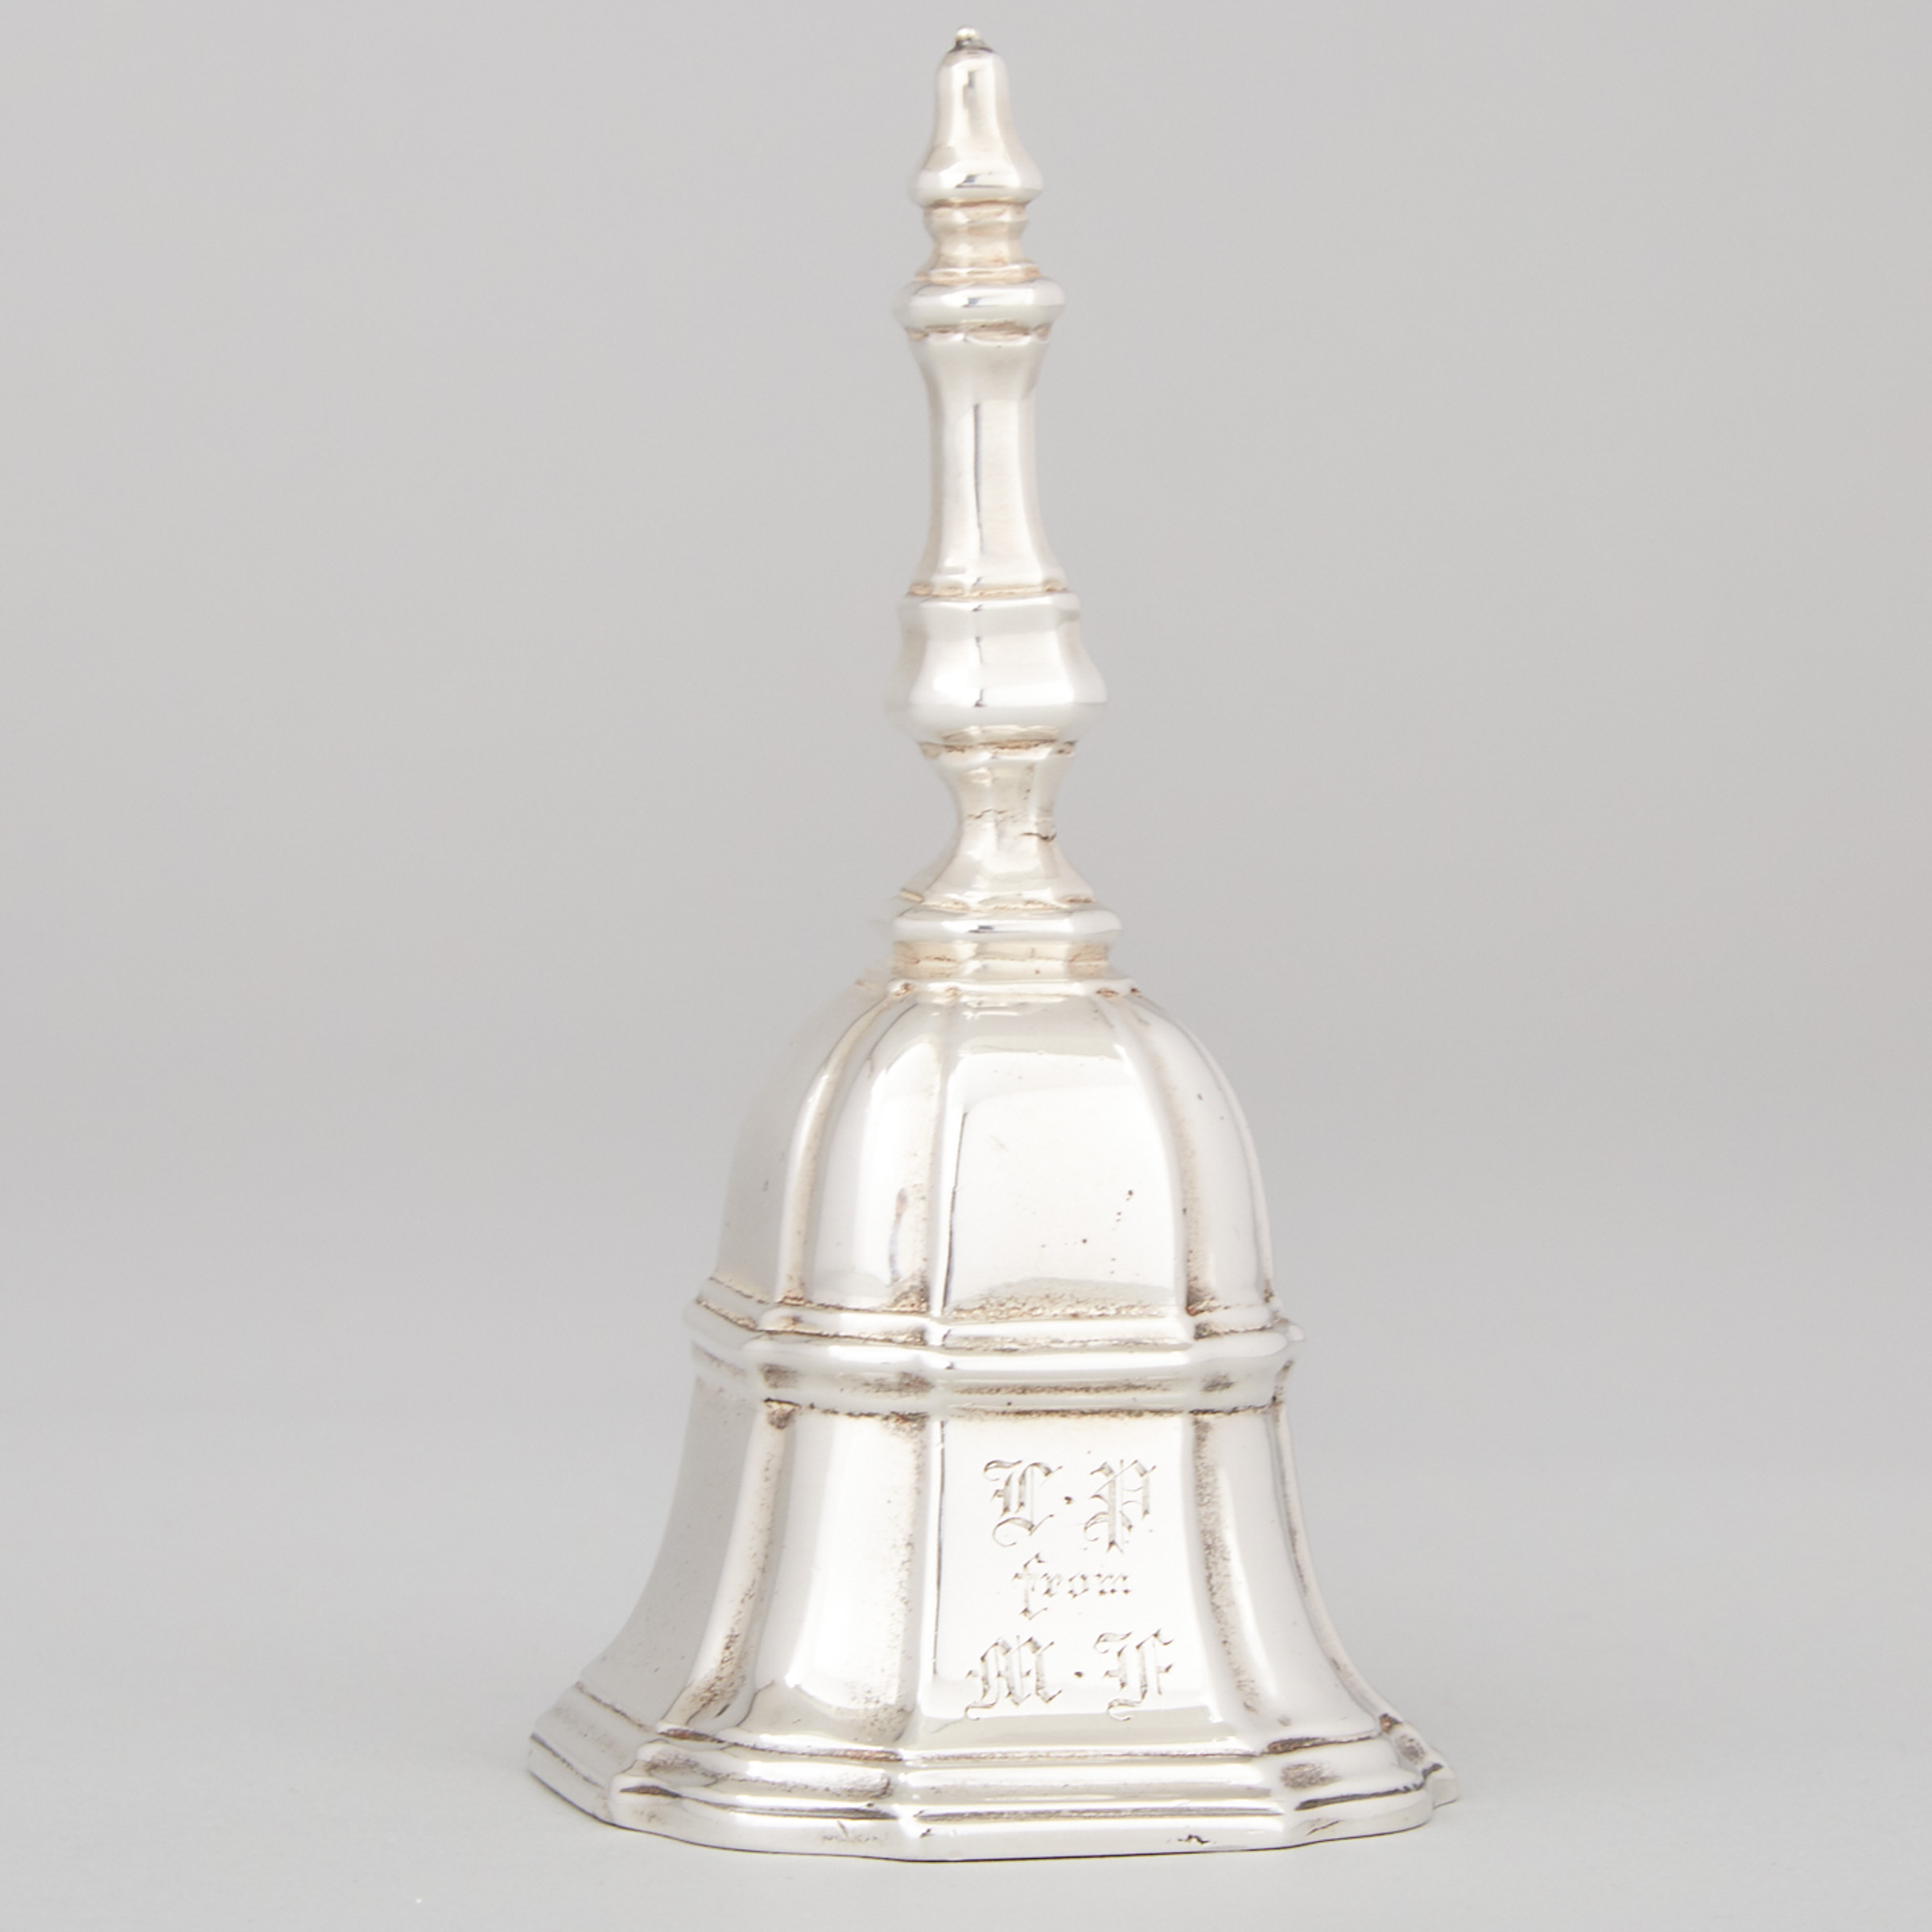 Victorian Silver Table Bell, Susannah Brasted, London, 1893